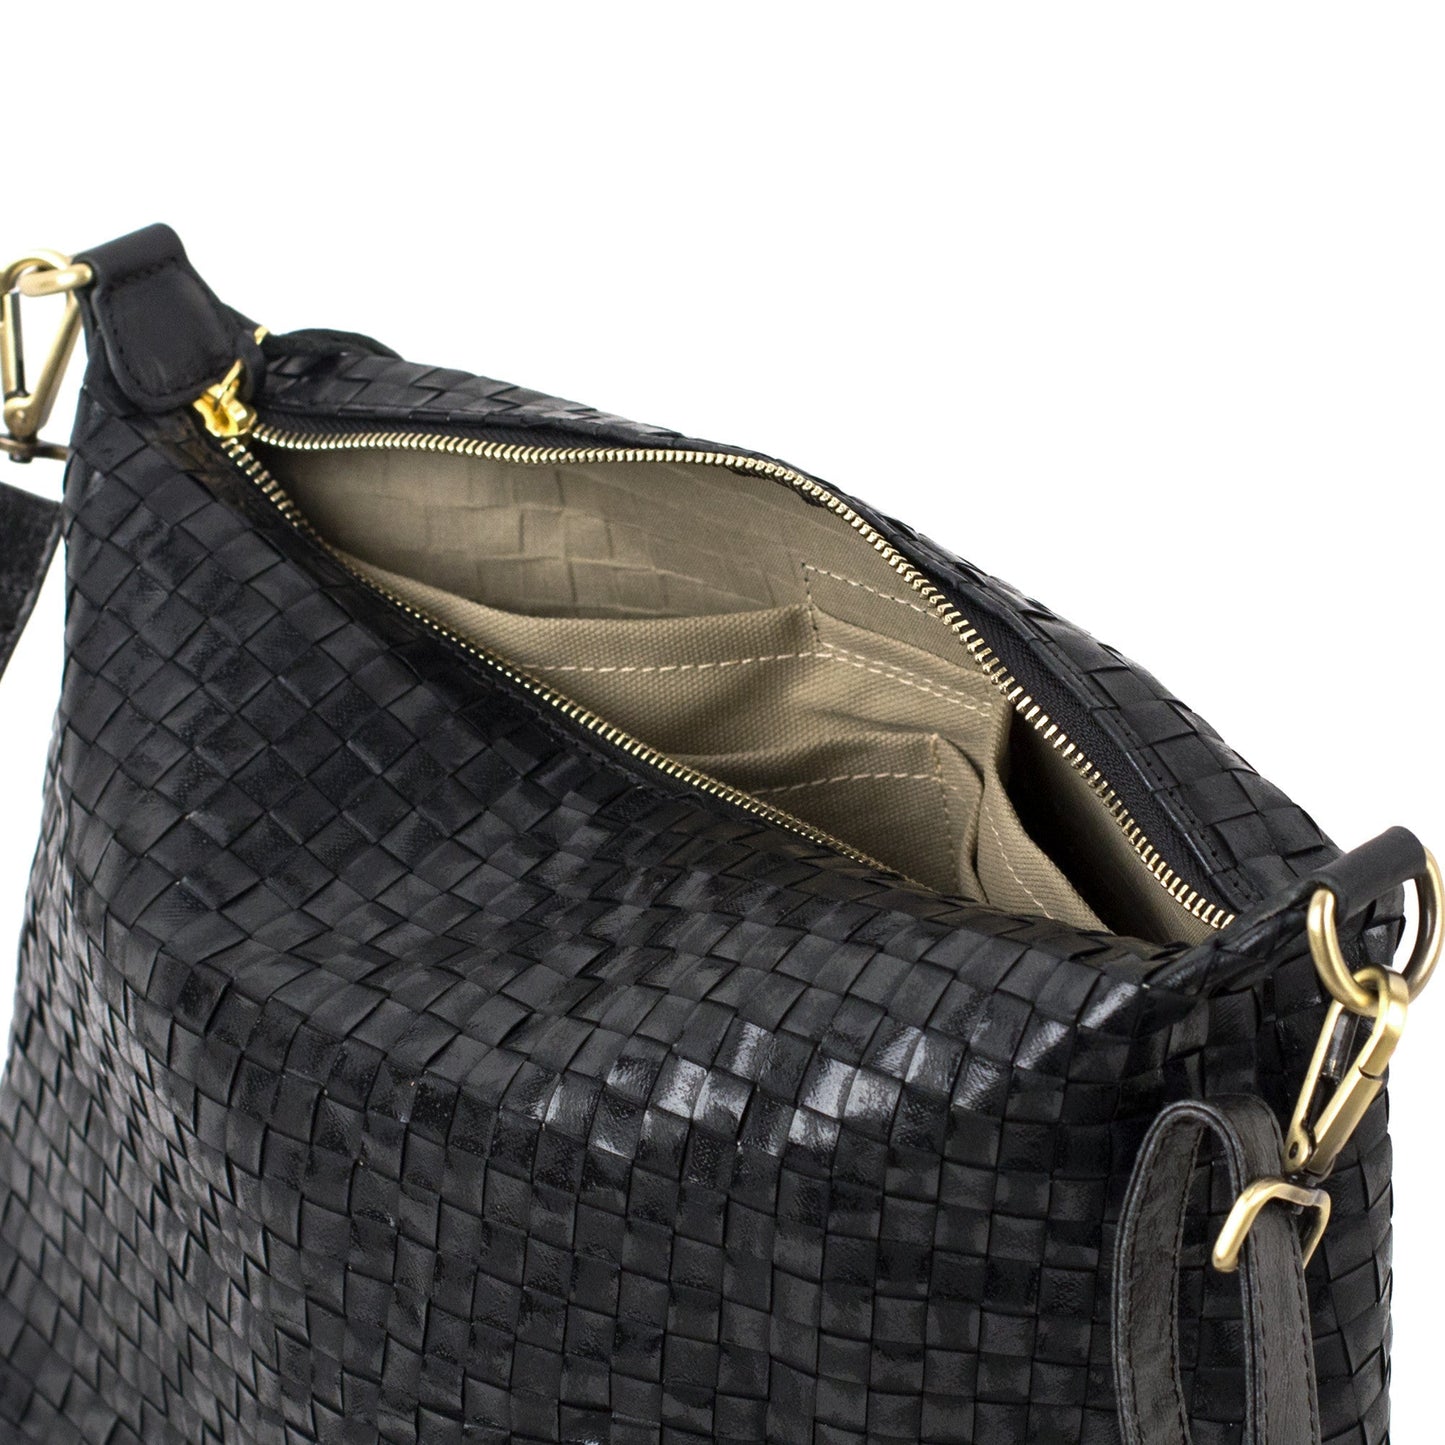 A black woven washable paper handbag is shown unzipped and open to reveal a beige cotton lining with interior pockets.